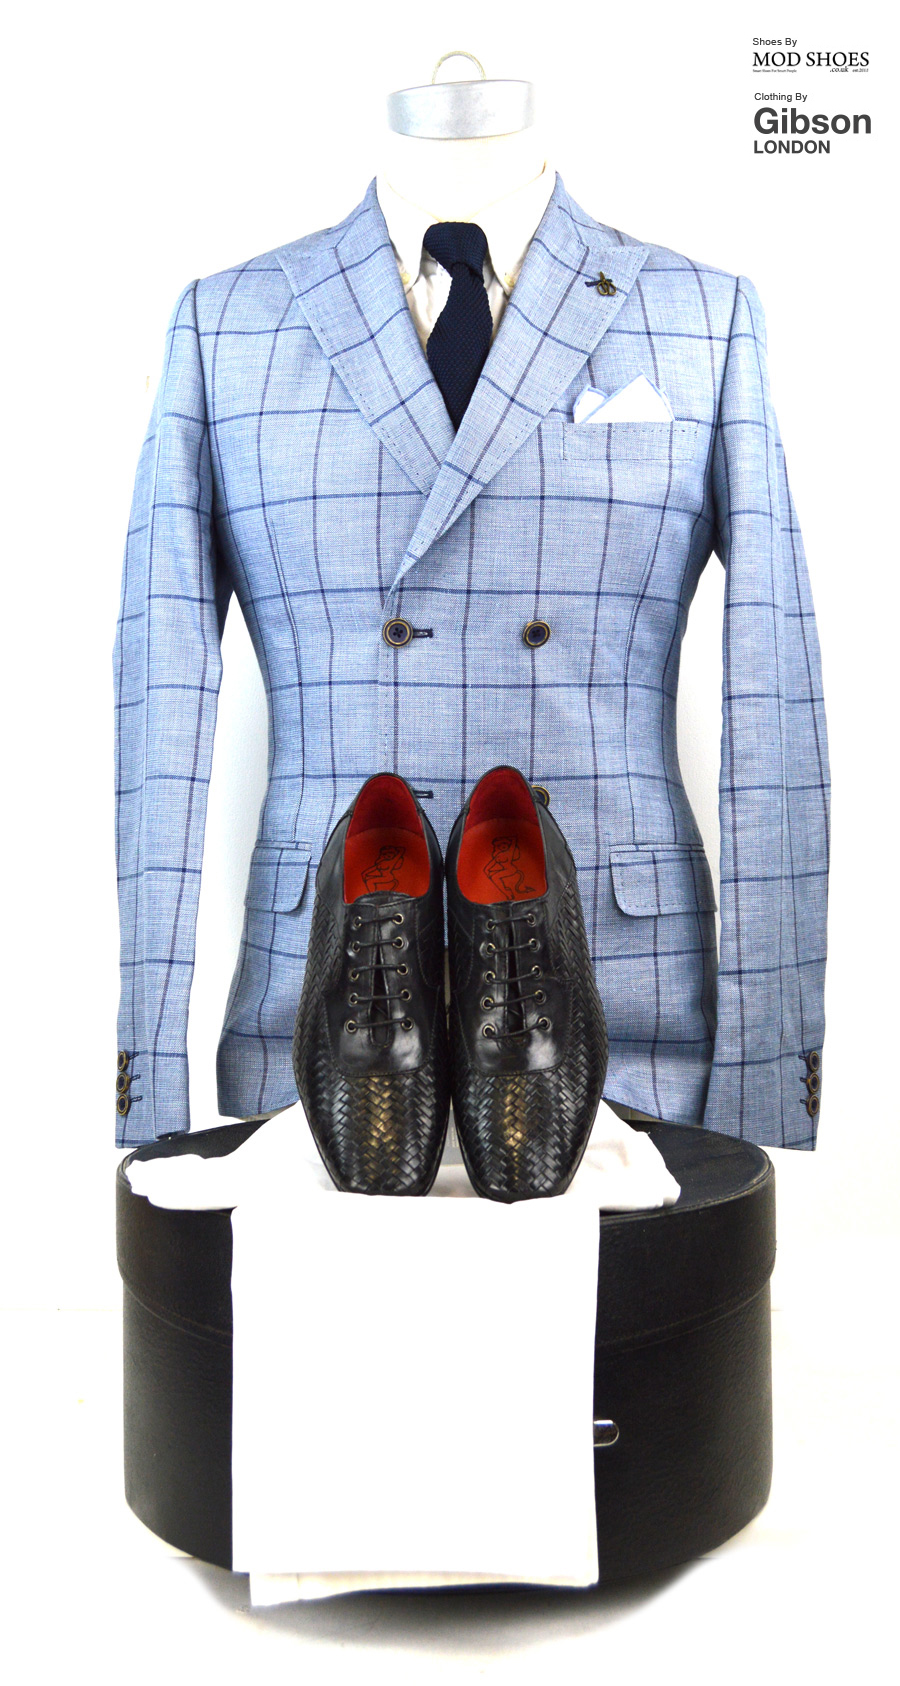 modshoes-black-weavers-with-light-blue-jacket-from-gibson-clothes